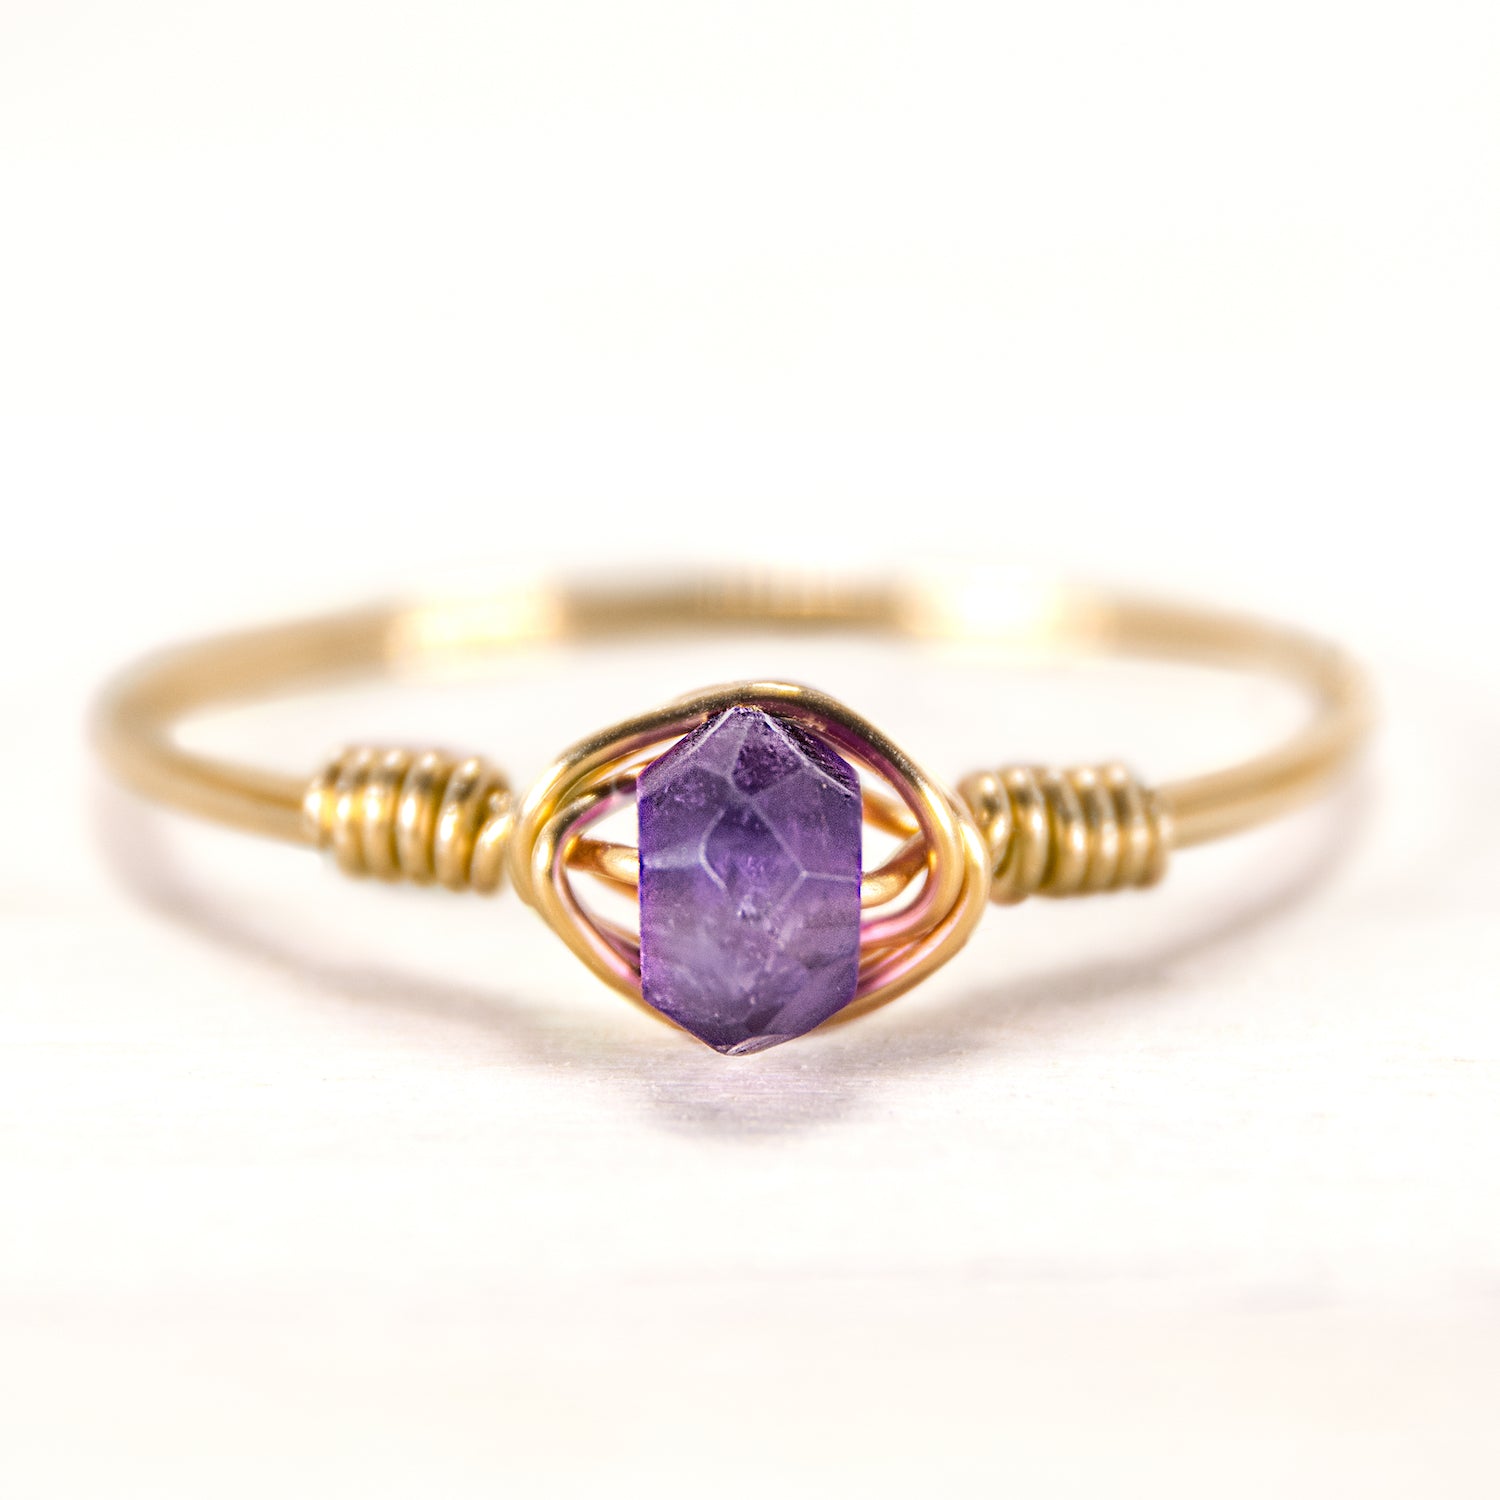 gemstone ring with amethyst in gold wire